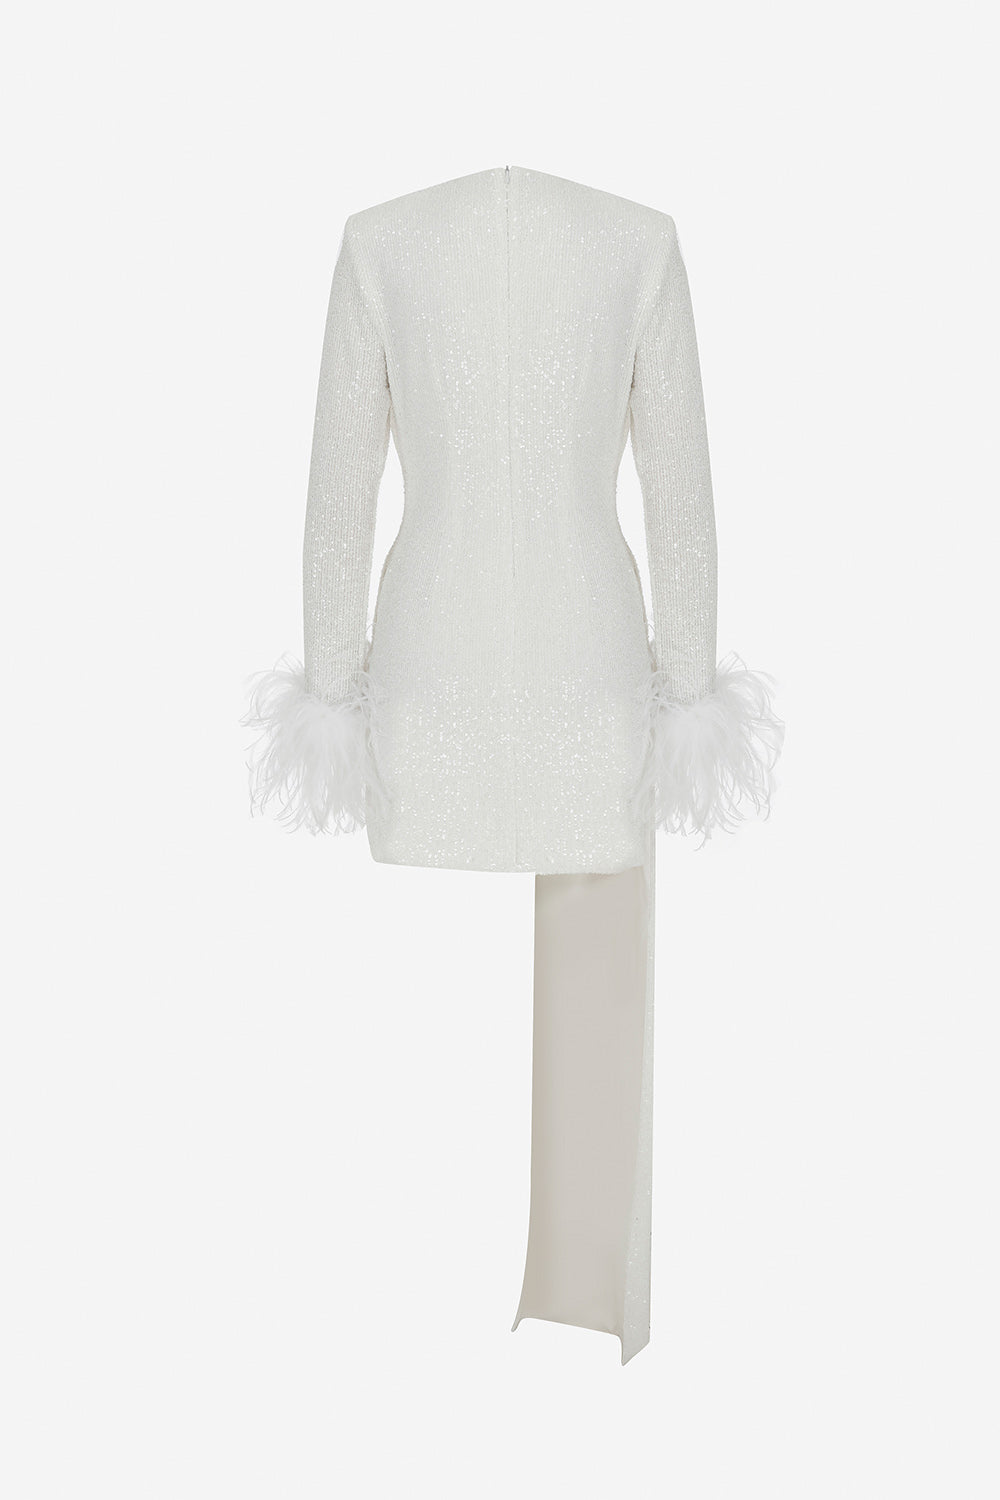 LULU - MINI SEQUIN DRESS WİTH FEATHERS in White